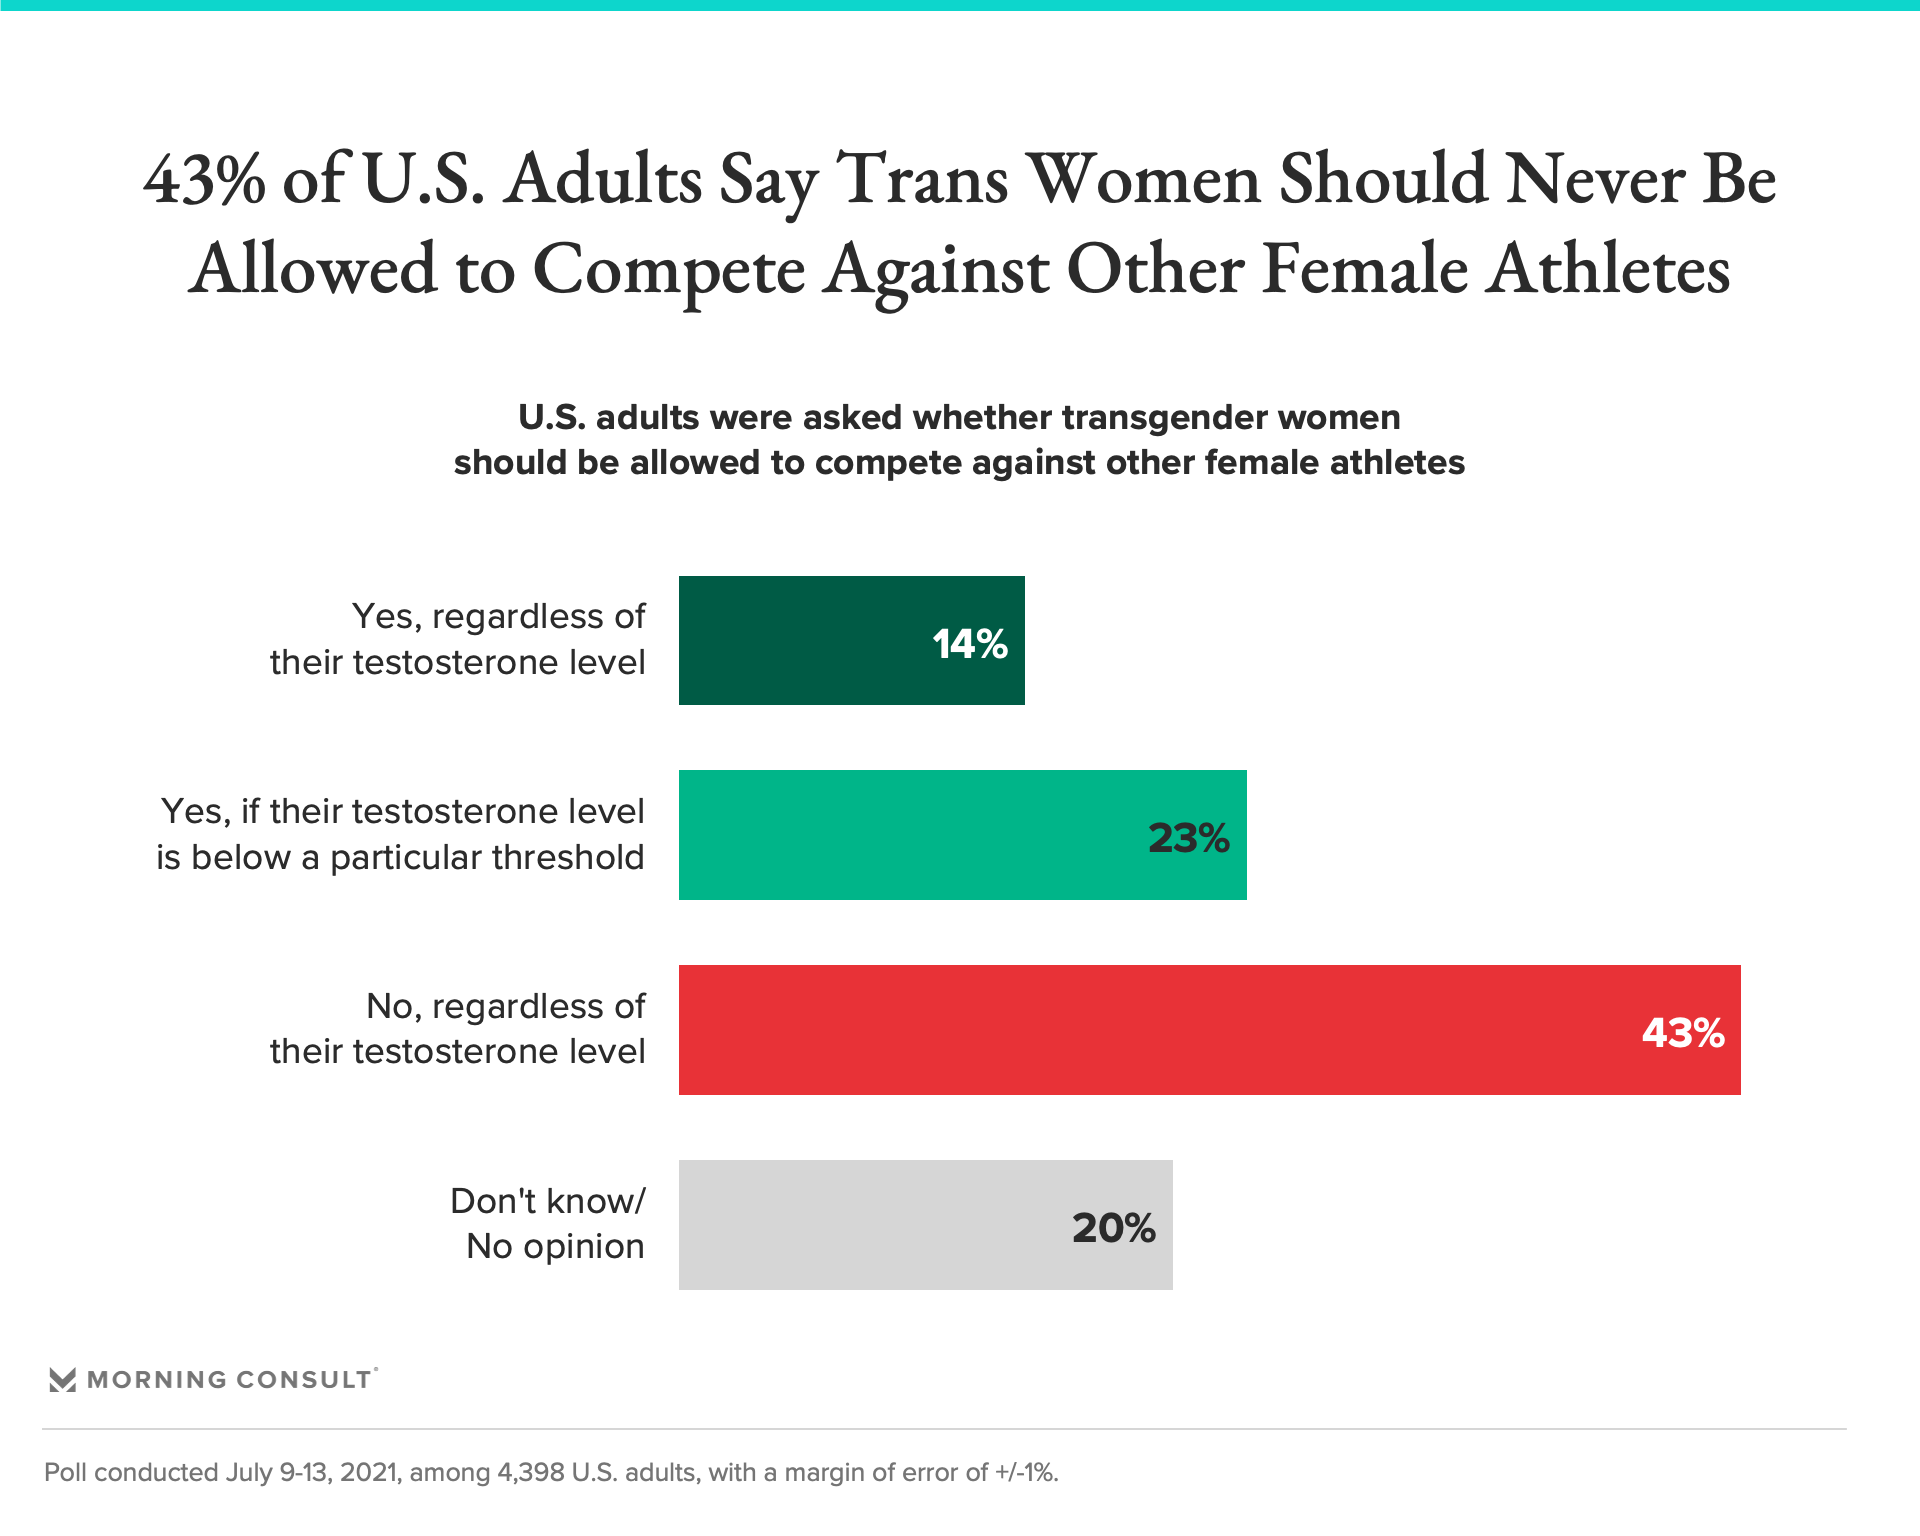 Ahead of Trans Woman's Historic Olympic Debut, Americans Weigh in on